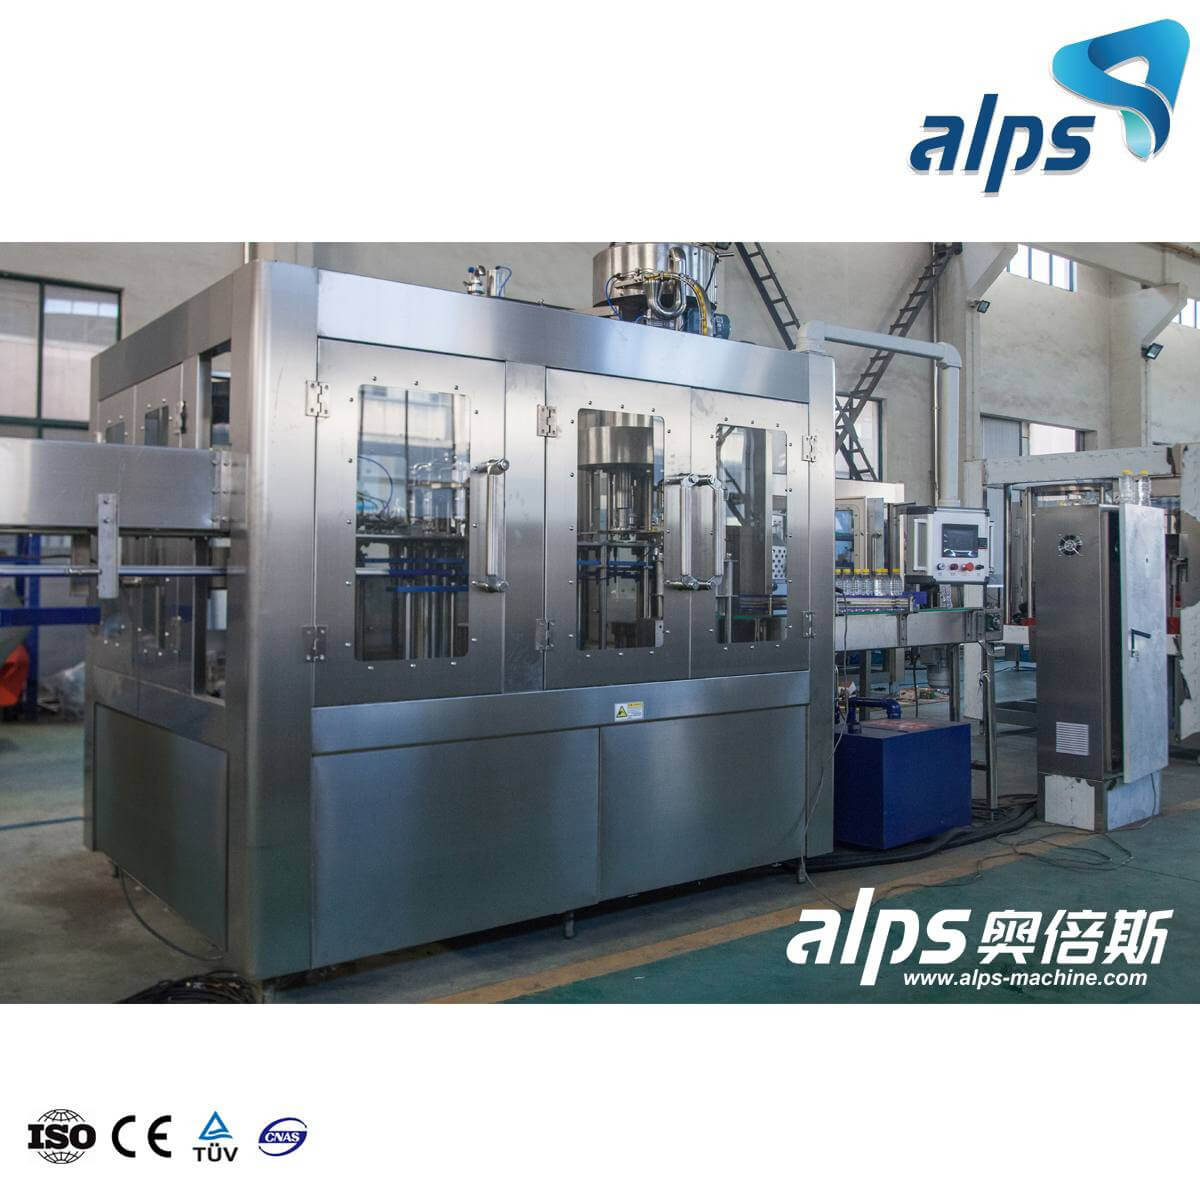 15000BPH Automatic Mineral Water Filling Machine (Model : CGF32-32-10)